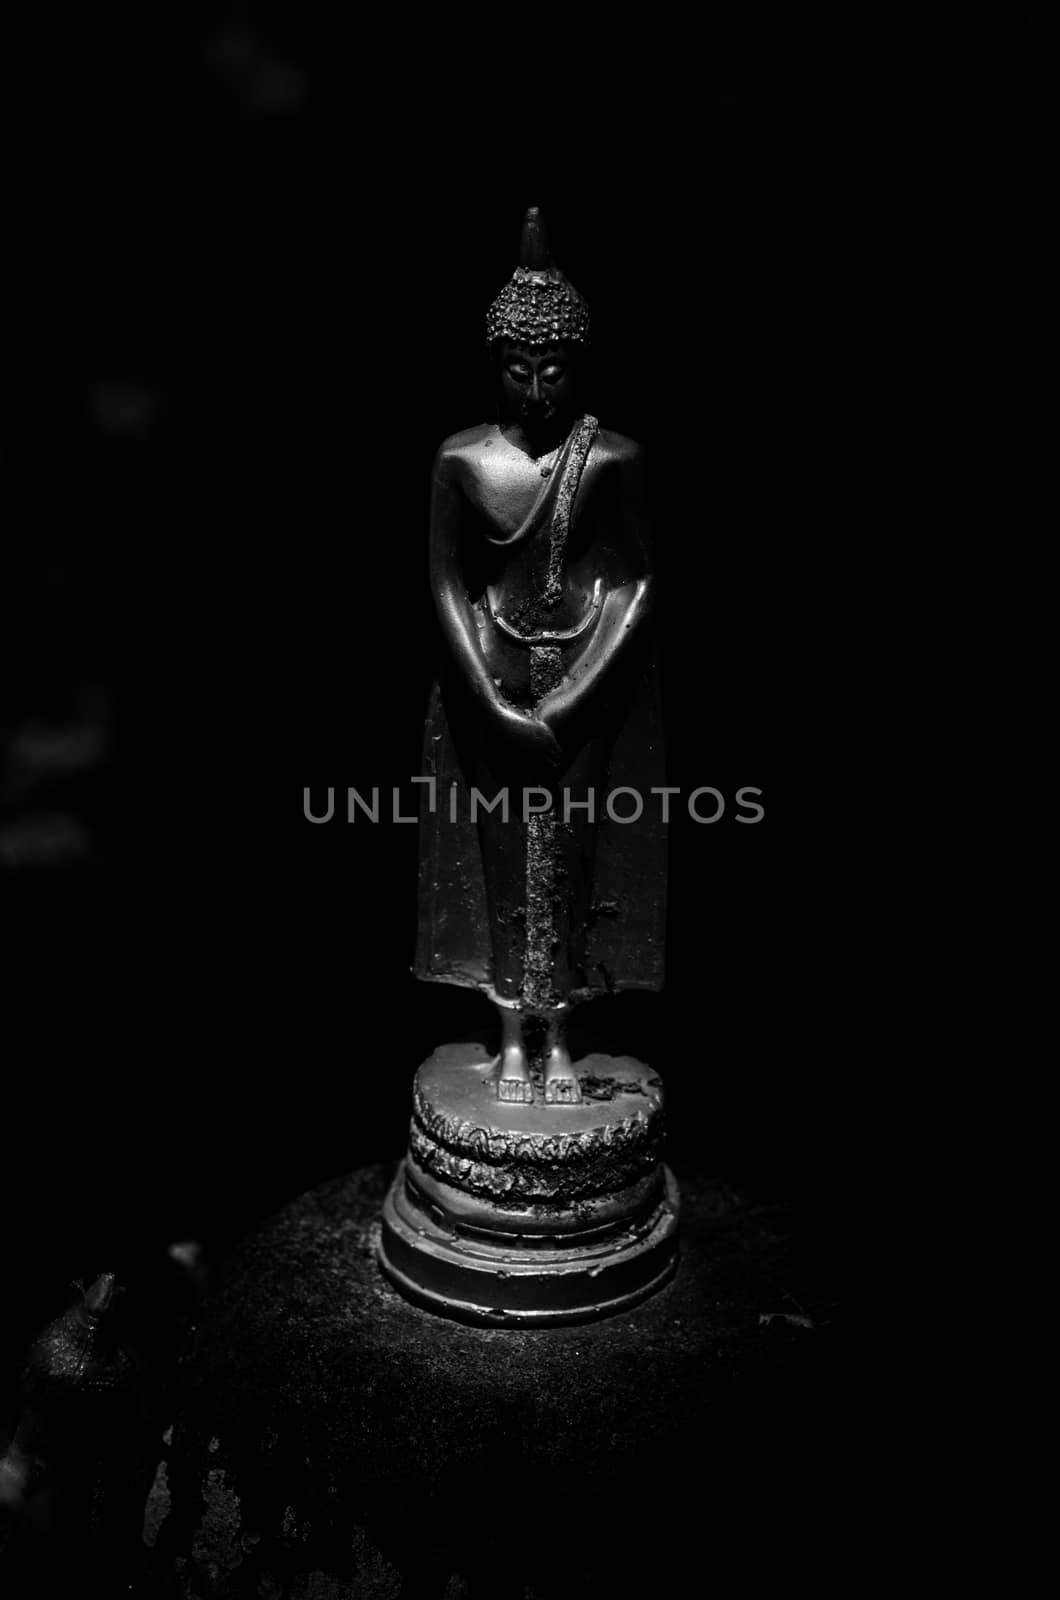 Buddharupa,Buddhism for statues or models of the Buddha.